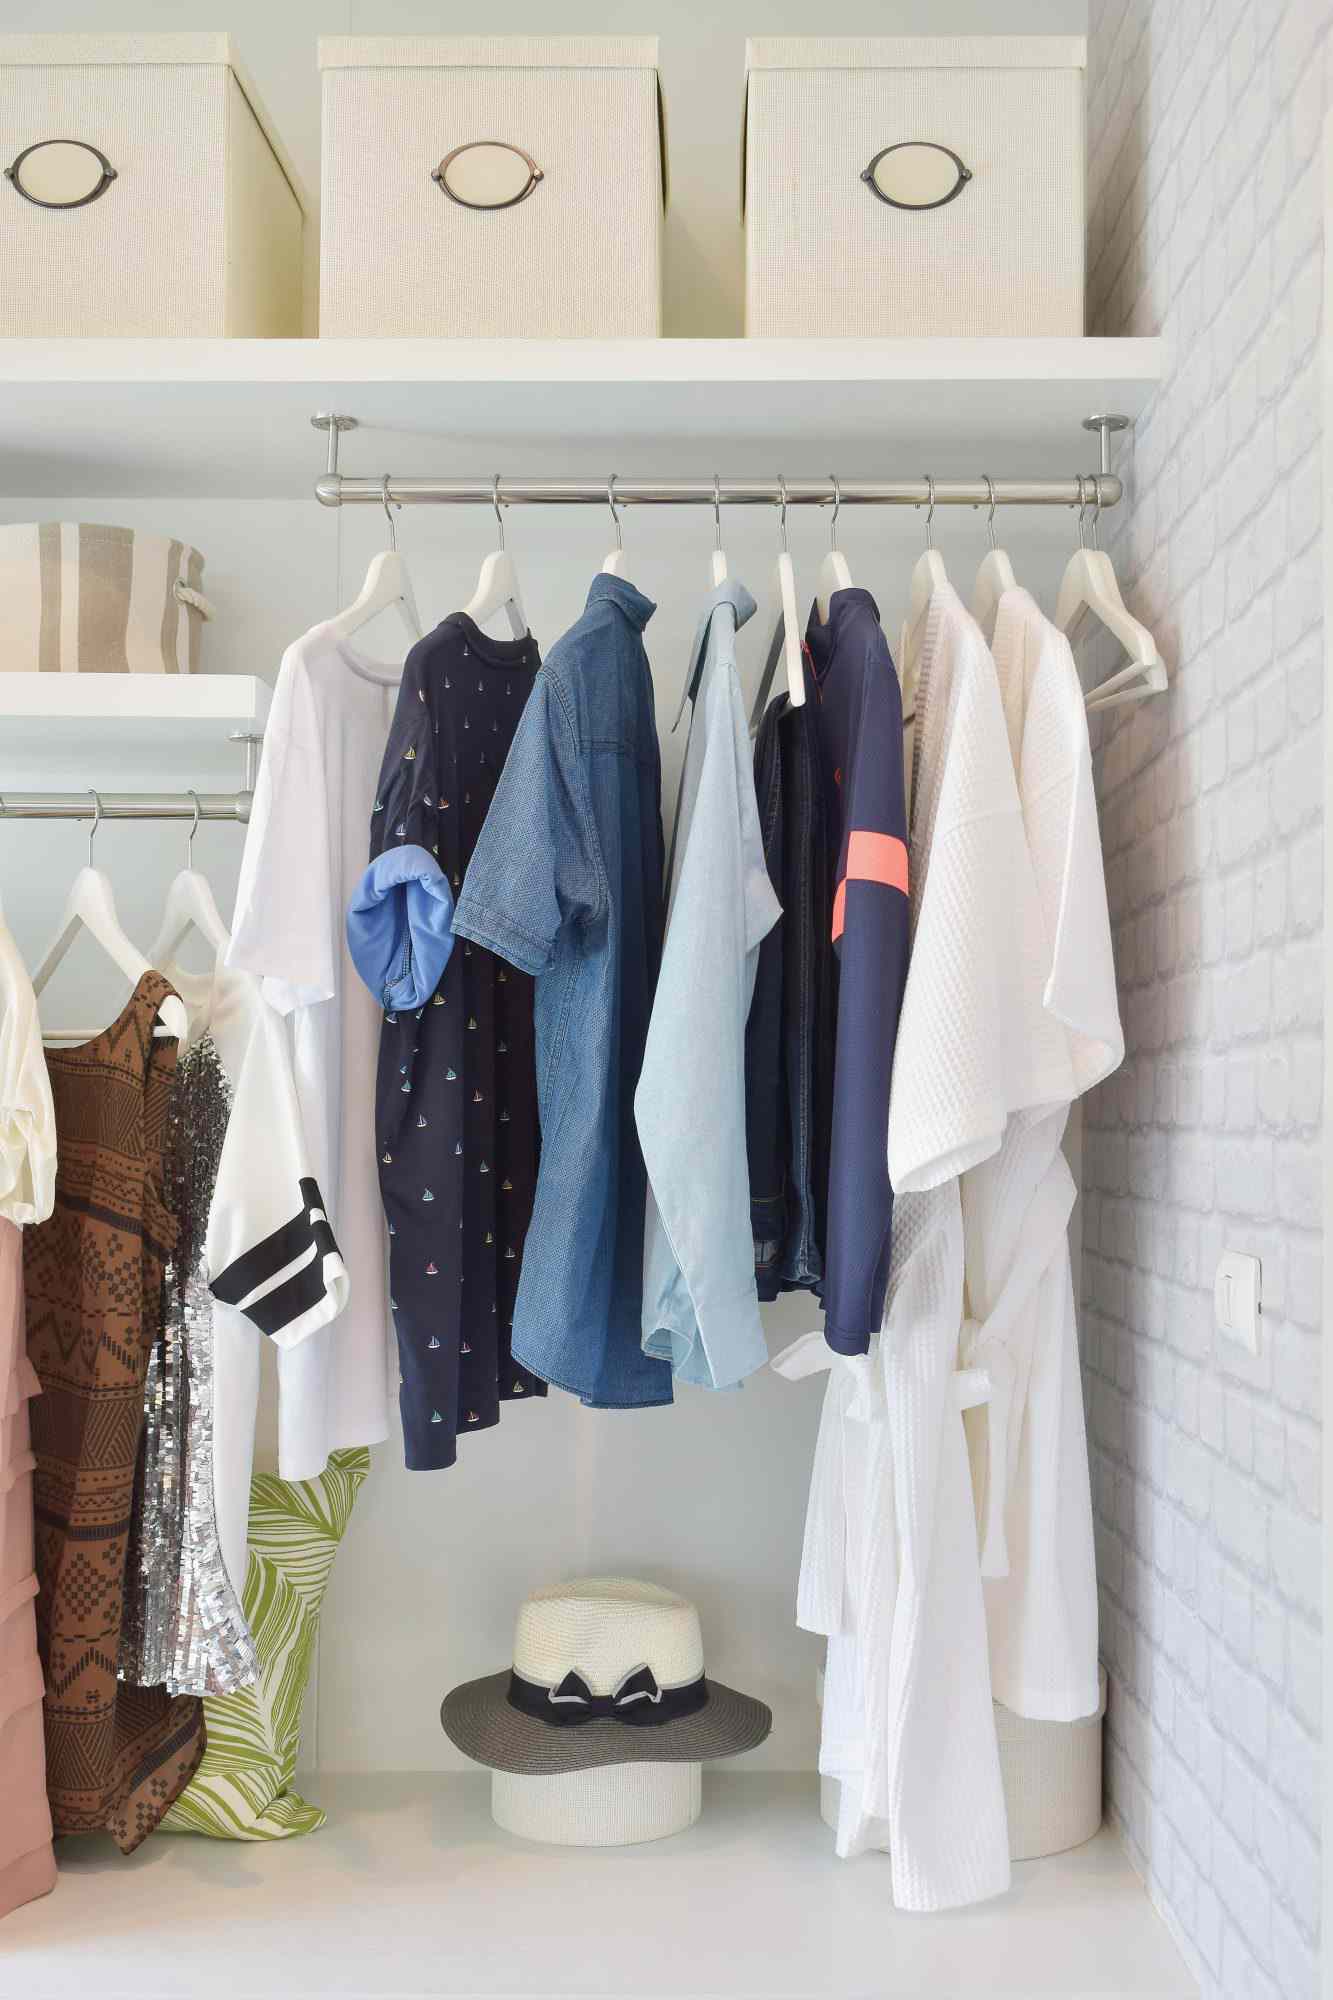 Clothes Hanging On Rack At Home in closet